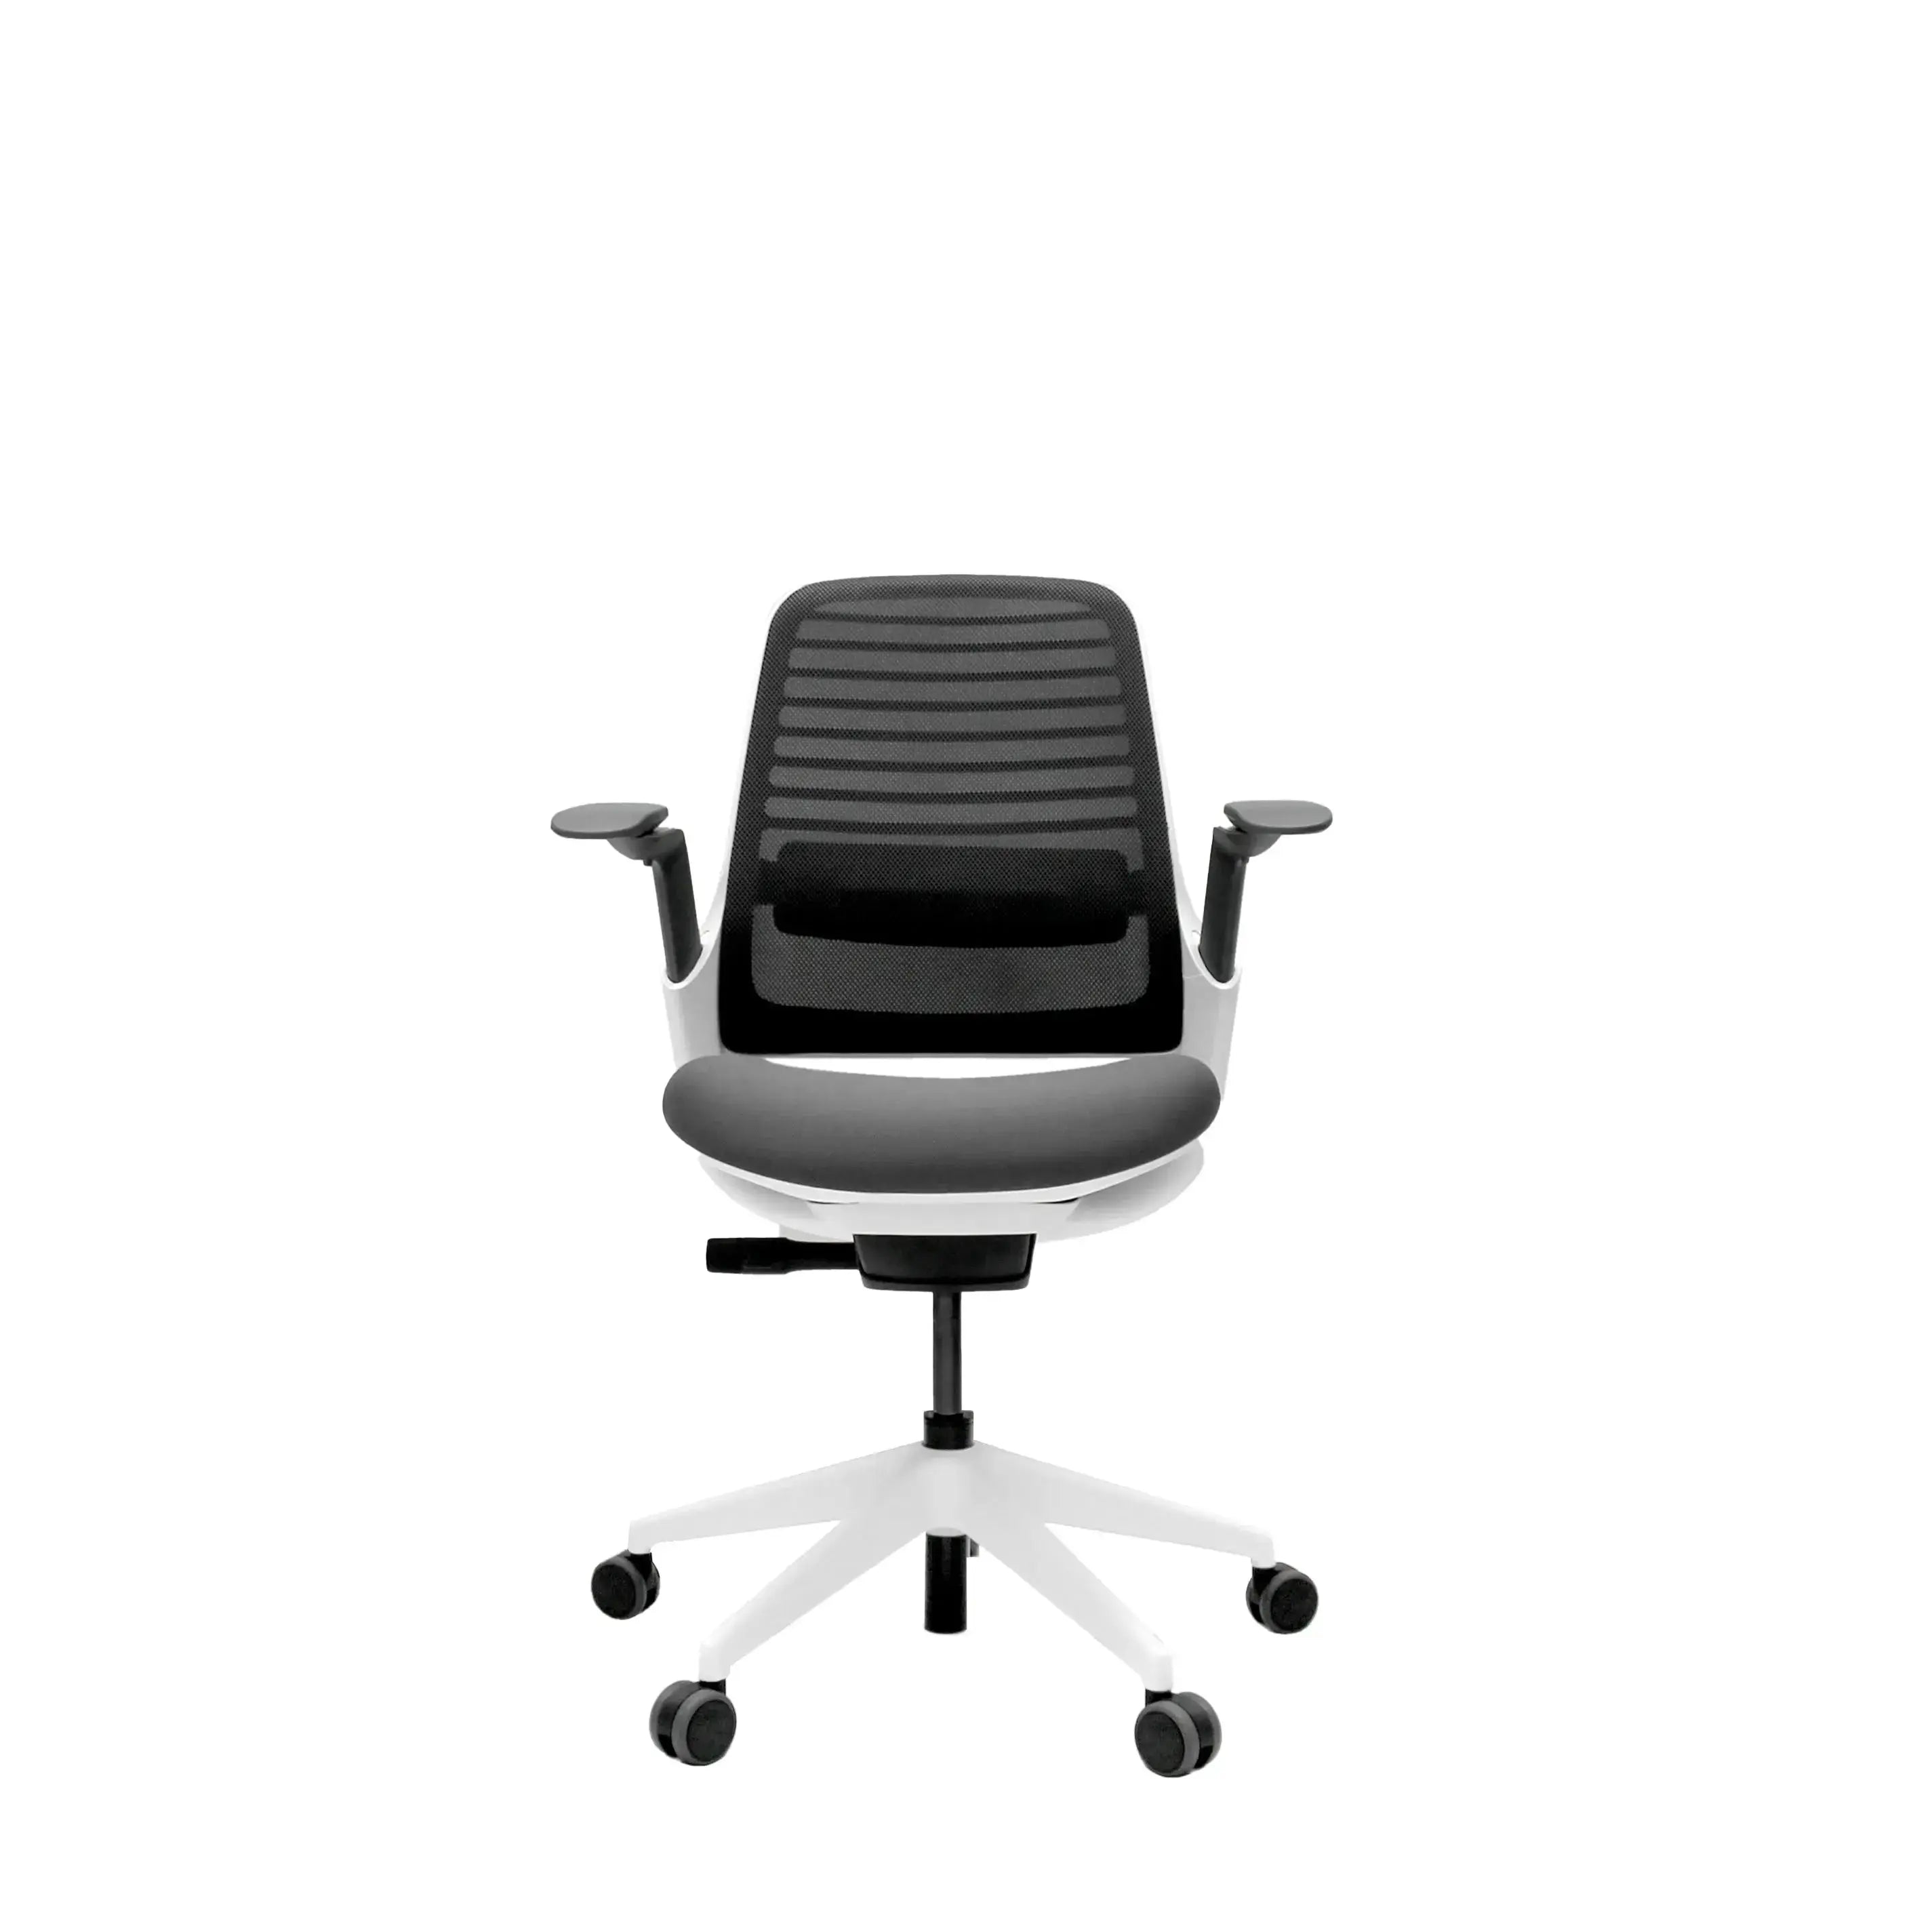 Steelcase Series 1 Seagull / Graphite Office Chairs